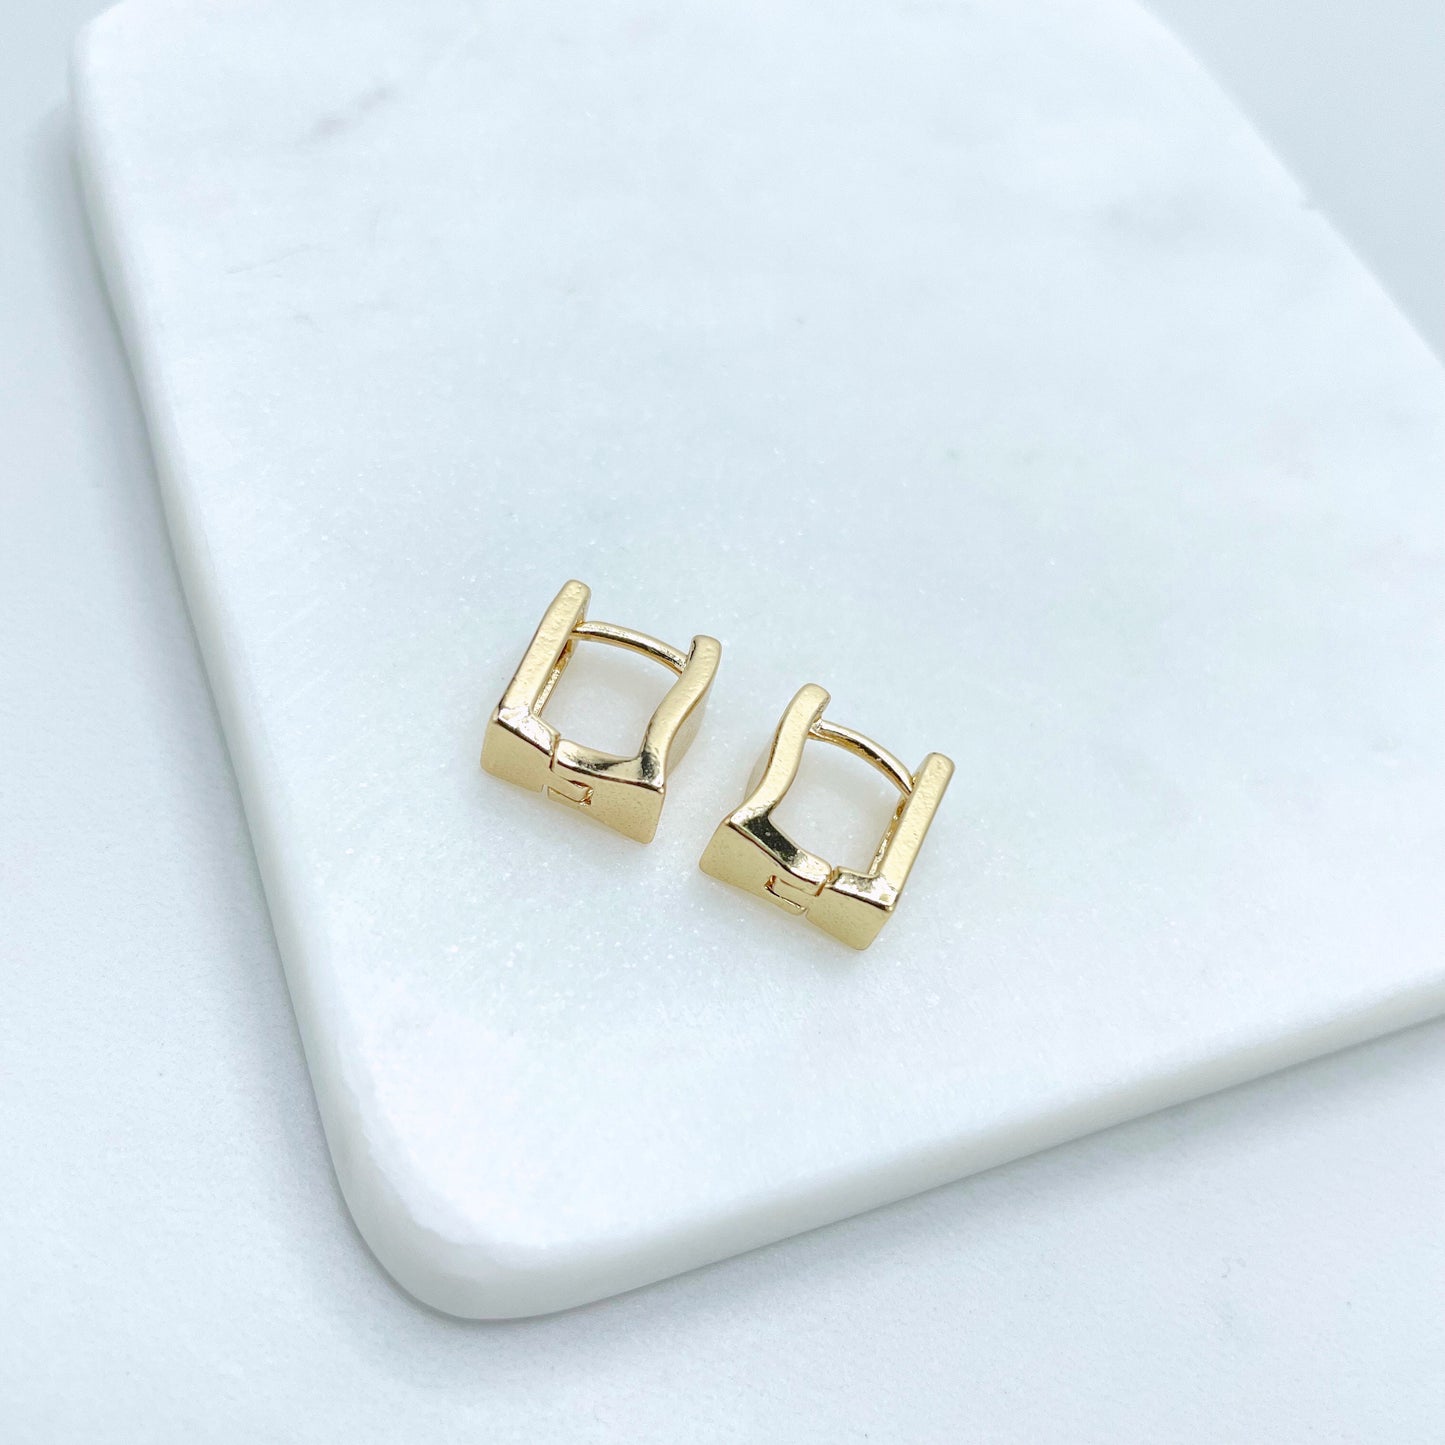 18k Gold Filled Square Shape 10mm Huggie Earrings, 6mm Thickness, Minimalist Design, Wholesale Jewelry Making Supplies